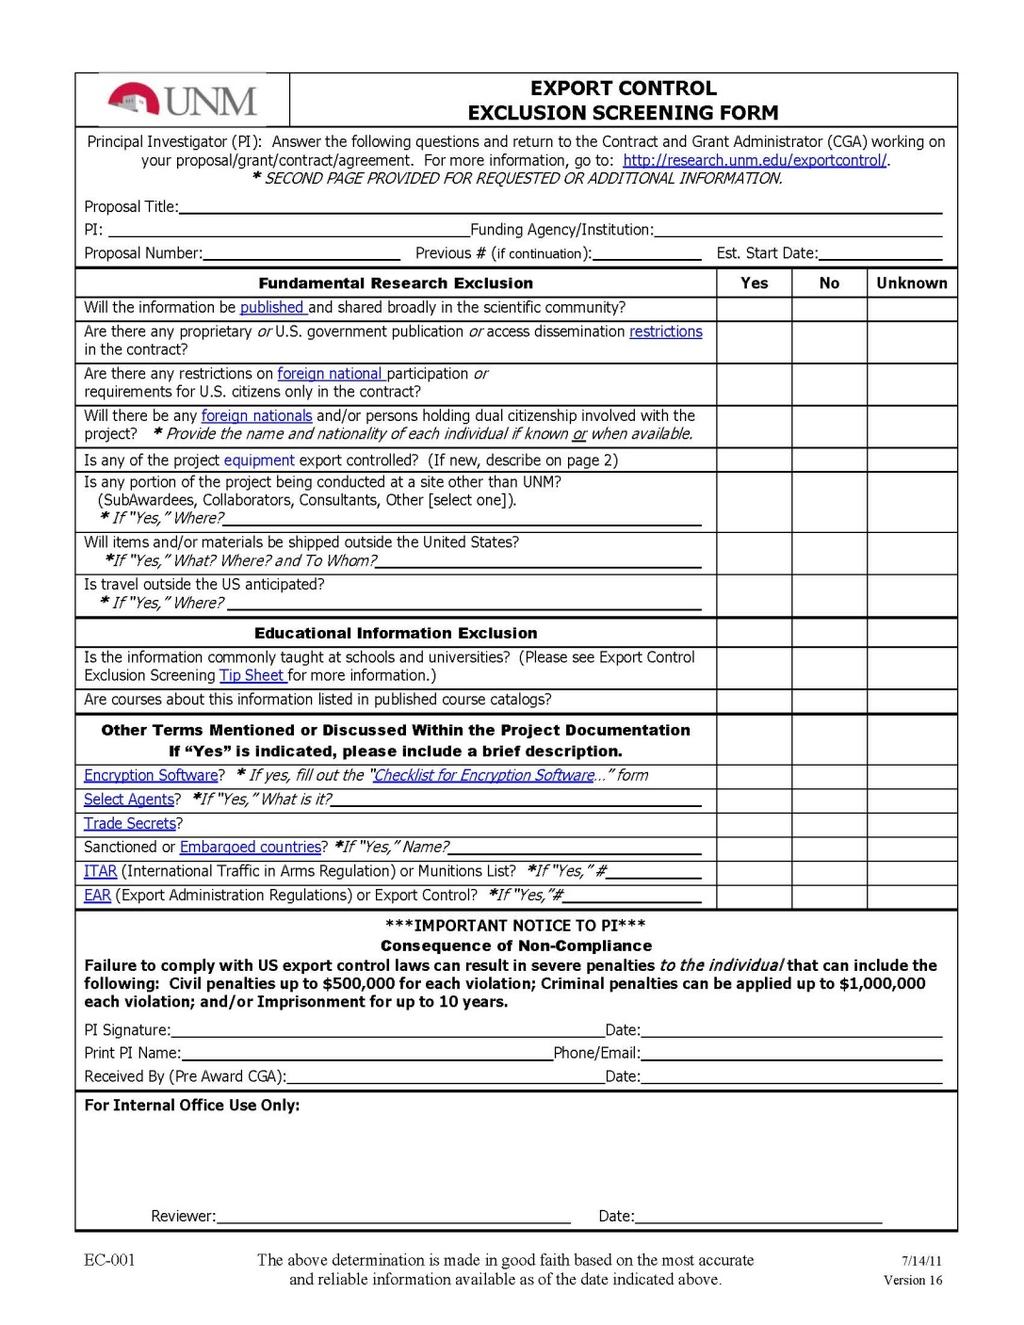 Export Control Exclusion Screening Form It is the proposal reviewers responsibility to collect and upload the ECES document into the CayuseSP record BEFORE sending the project